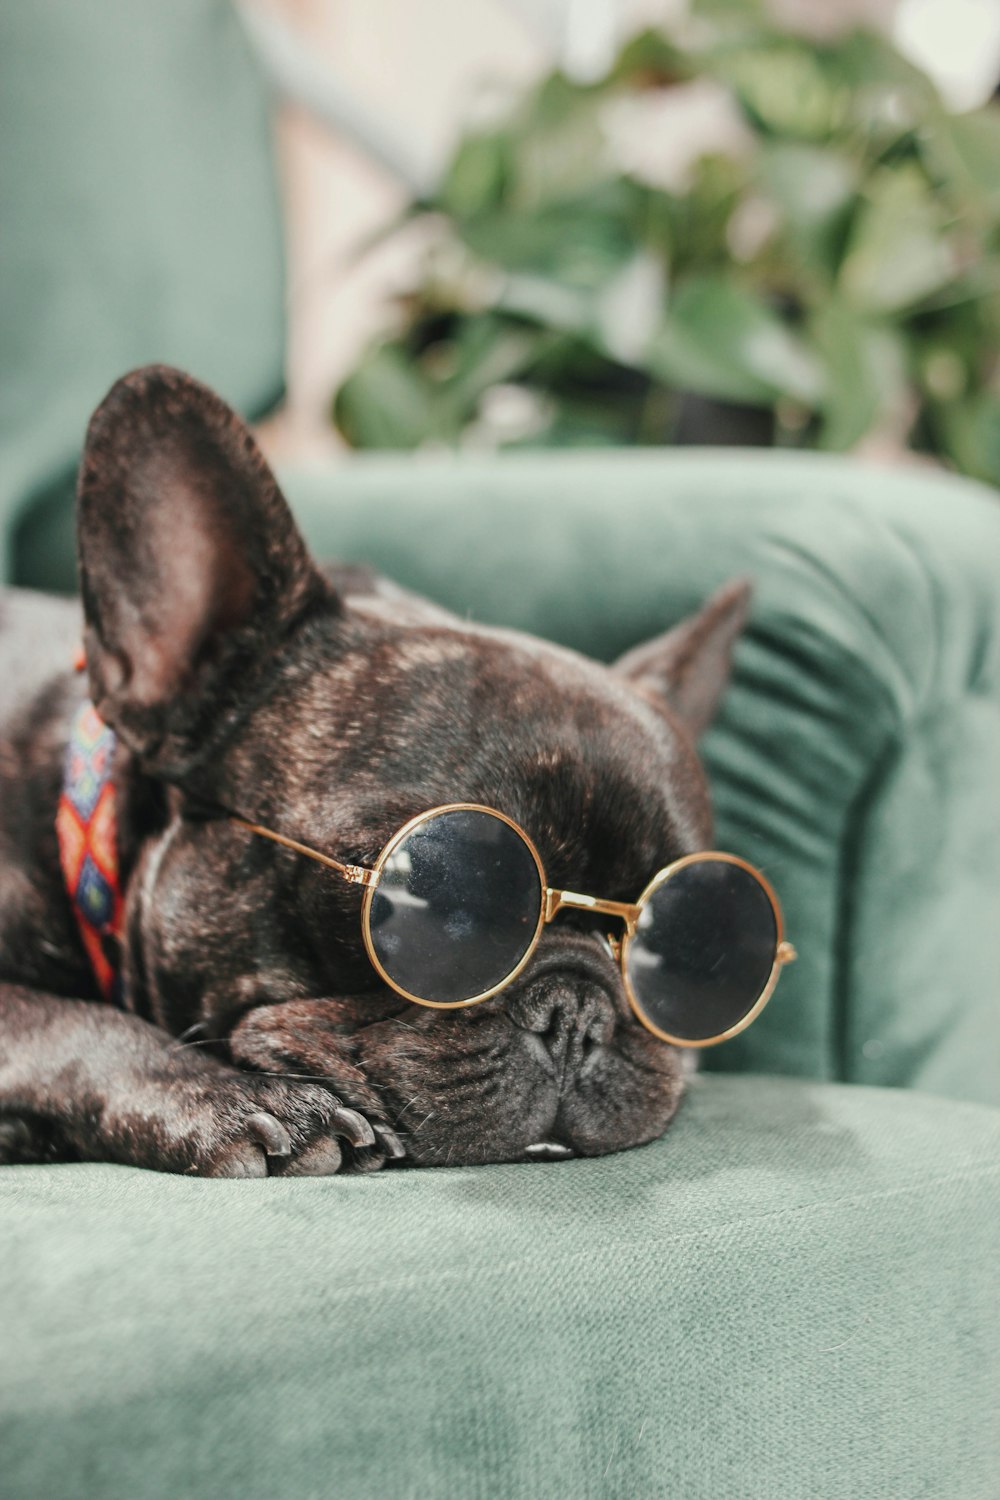 a small dog wearing sunglasses laying on a couch